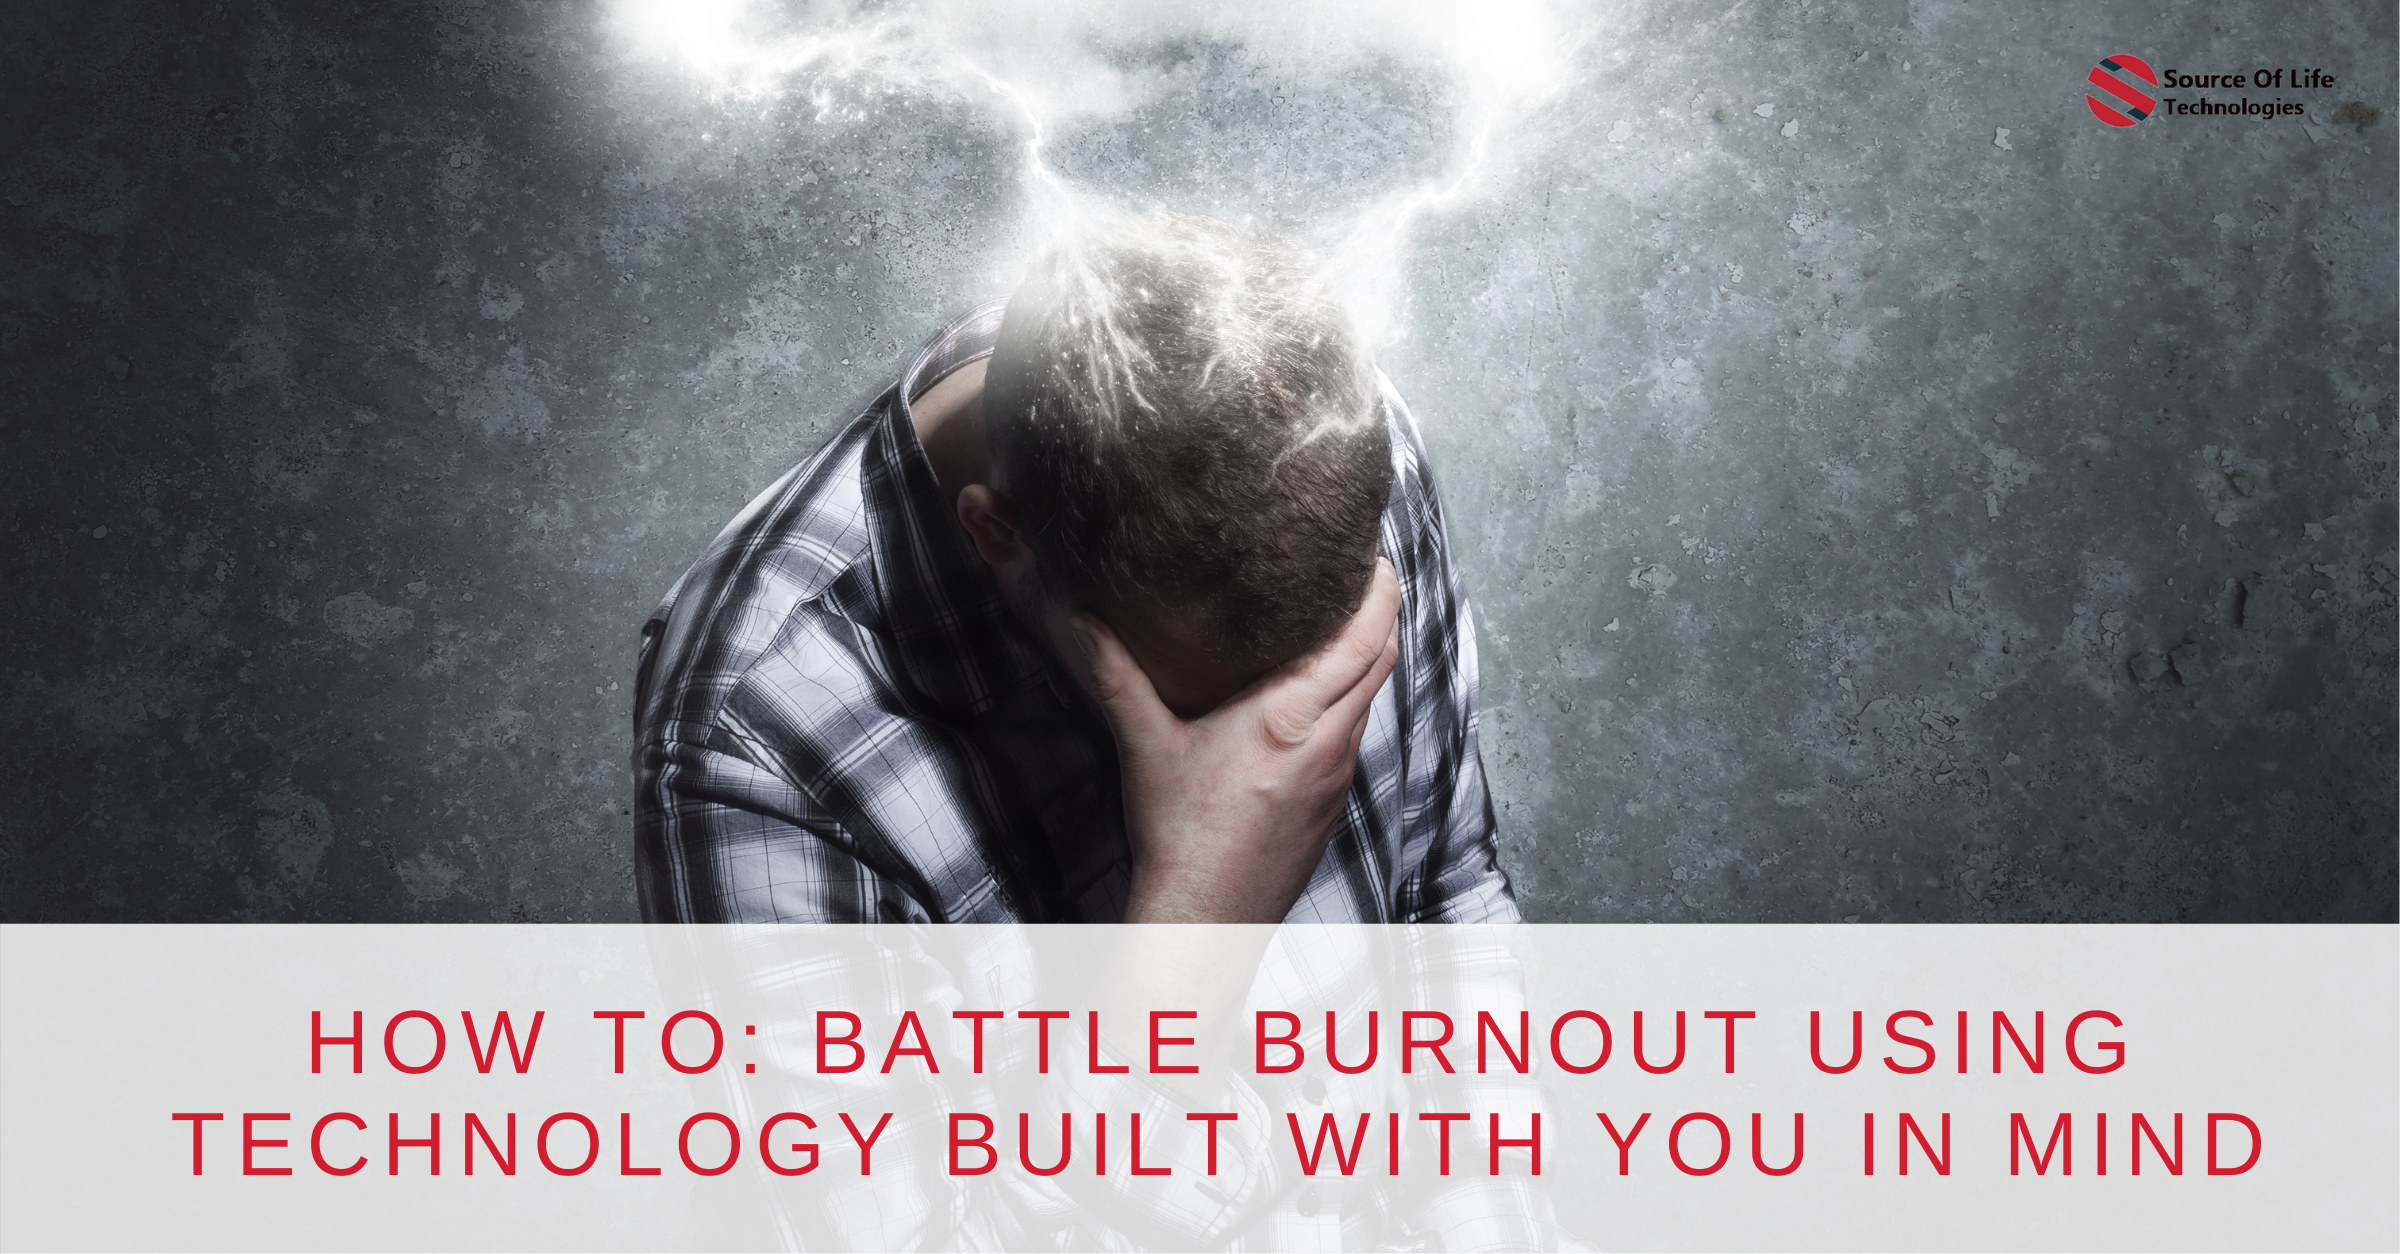 How To: Battle Burnout Using Technology Built with You in Mind